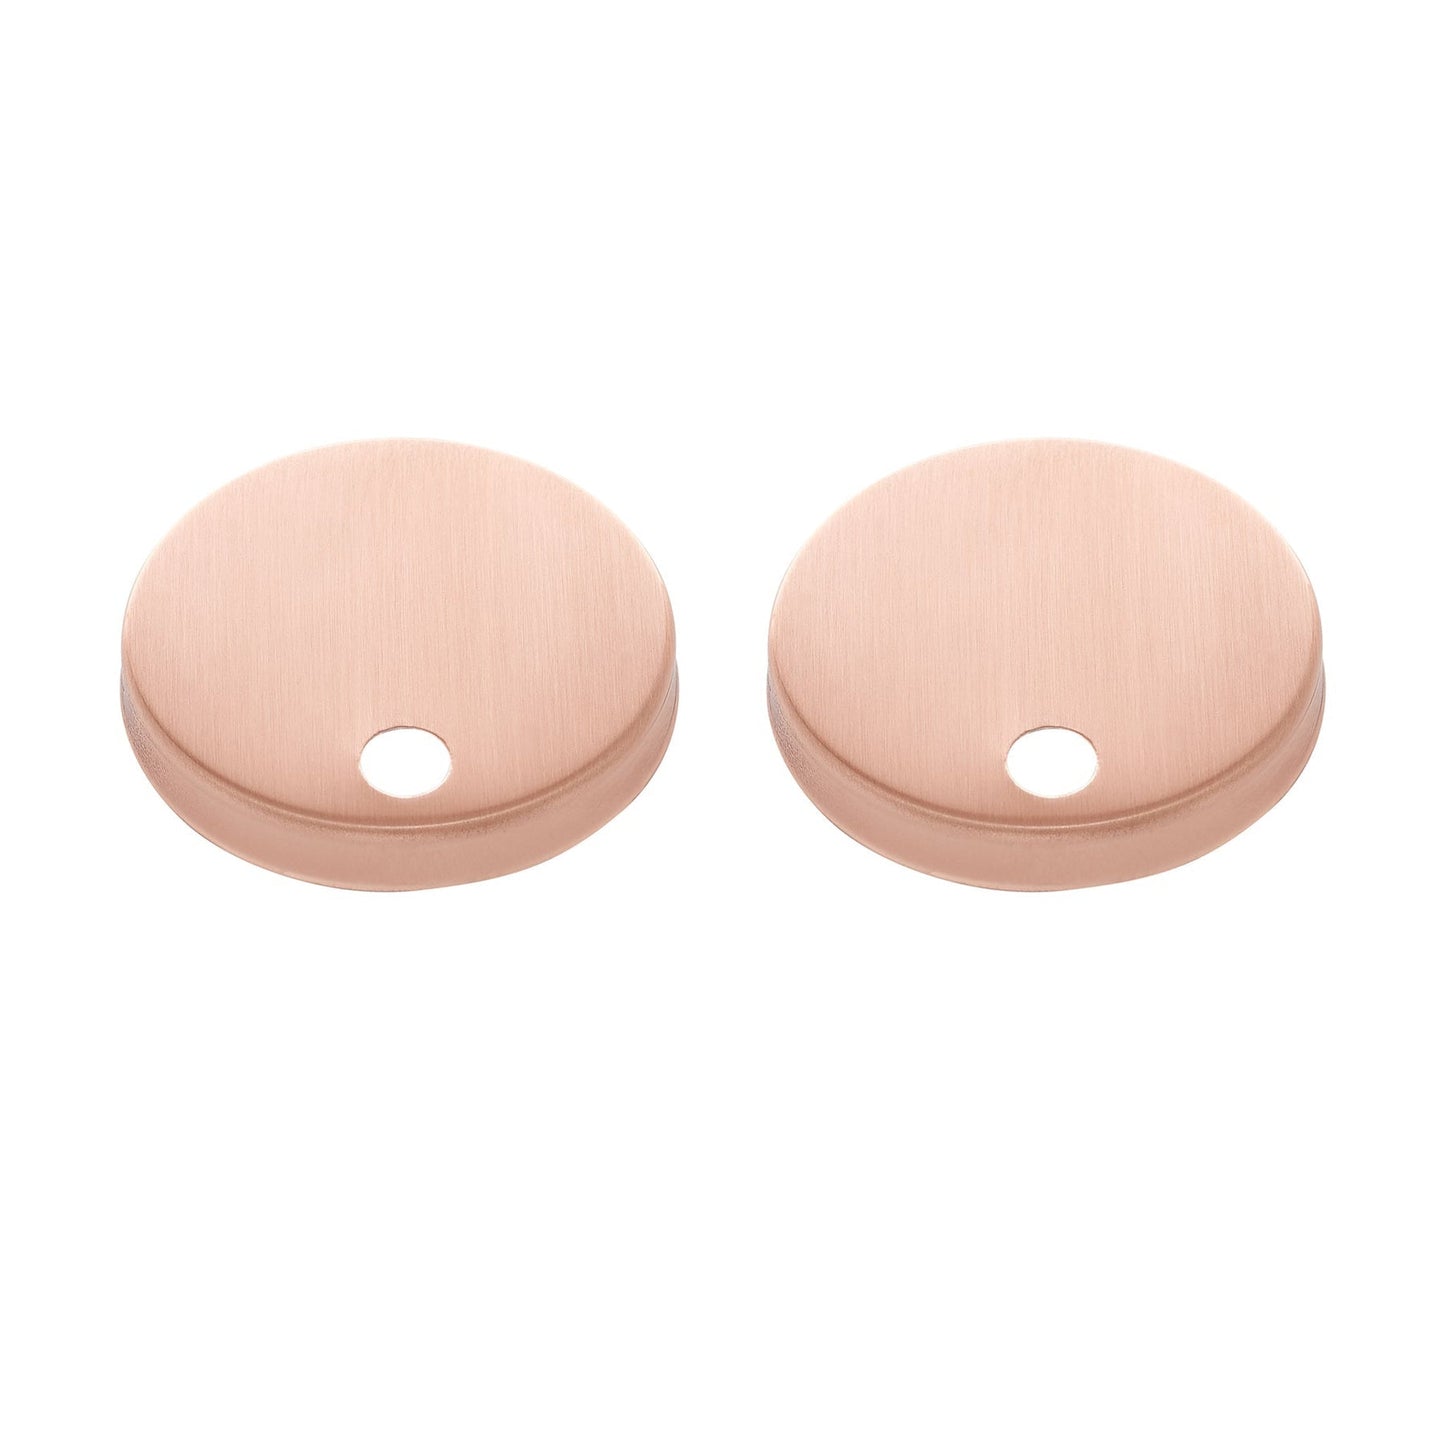 Swiss Madison Rectangular Rose Gold Toilet Push Buttons With QQ Feet